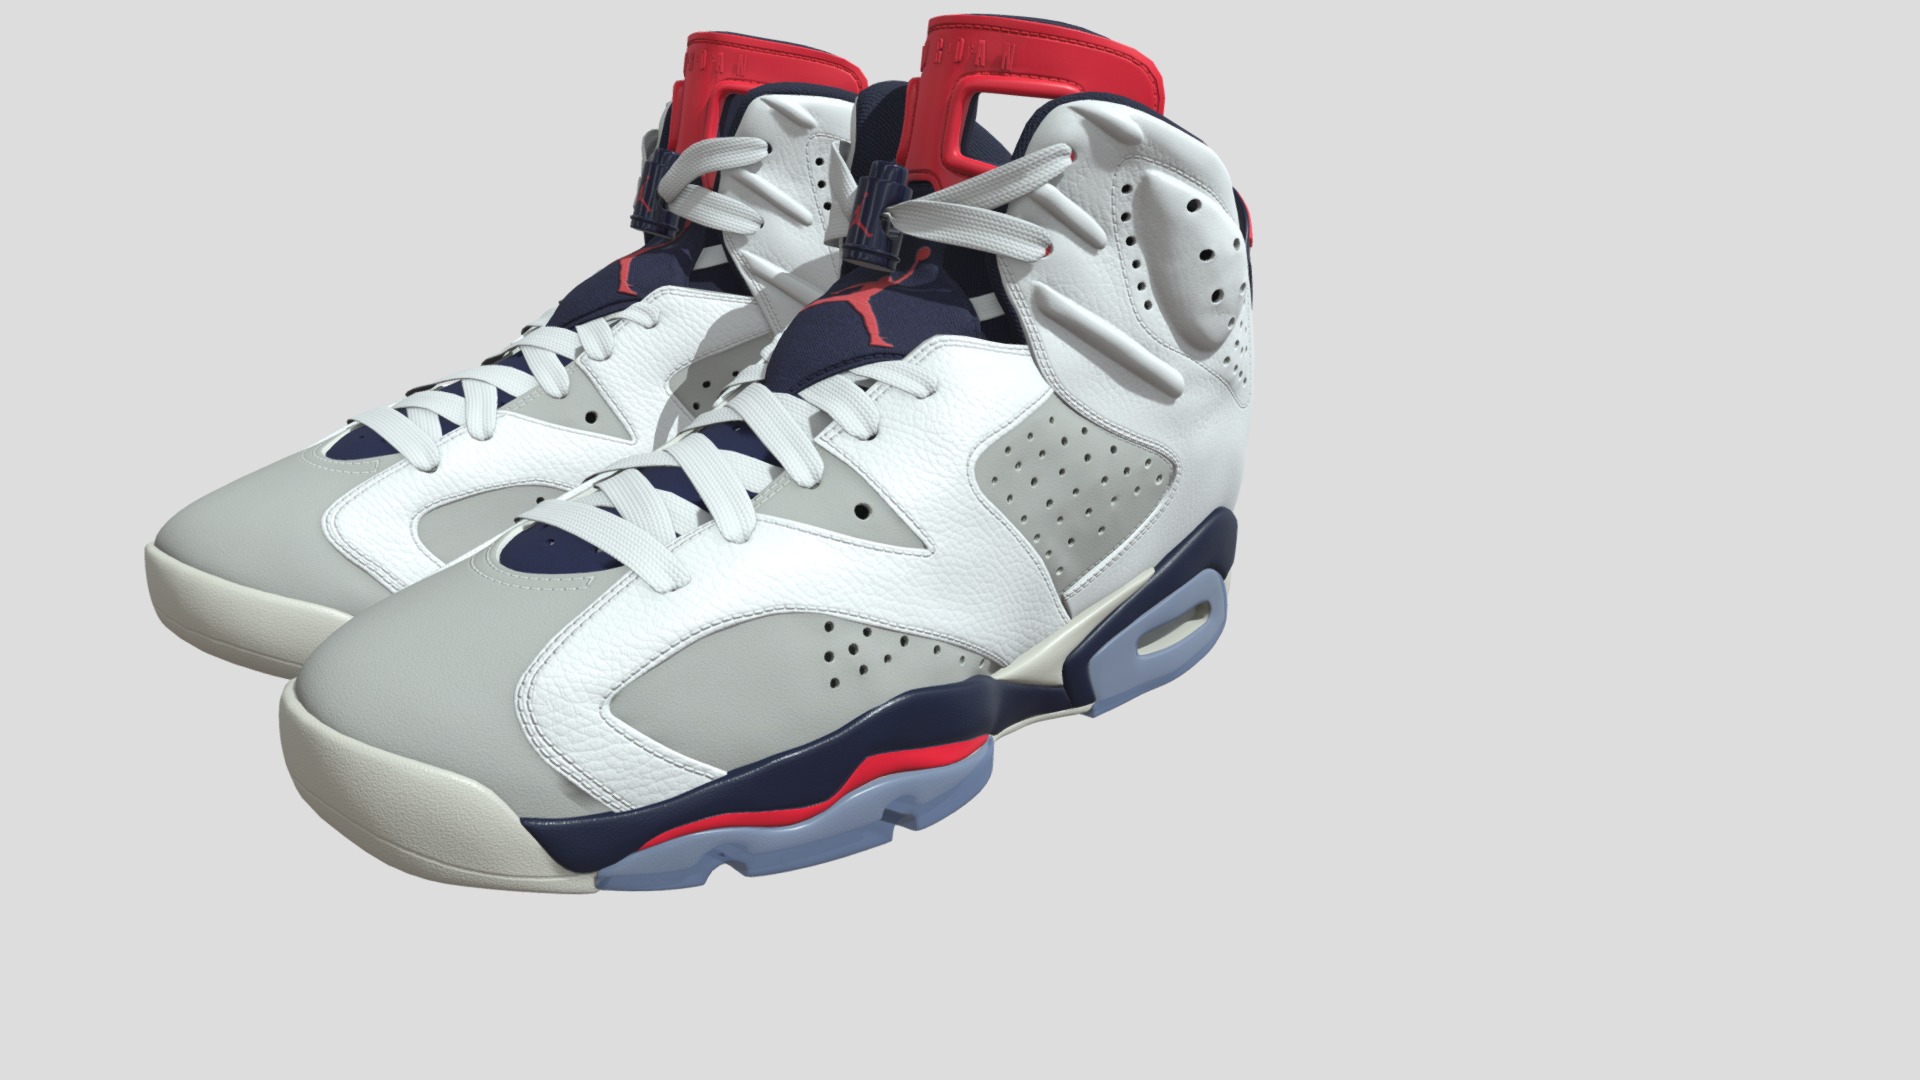 3D model Jordan 6 Retro Tinker - This is a 3D model of the Jordan 6 Retro Tinker. The 3D model is about a pair of white and blue sneakers.